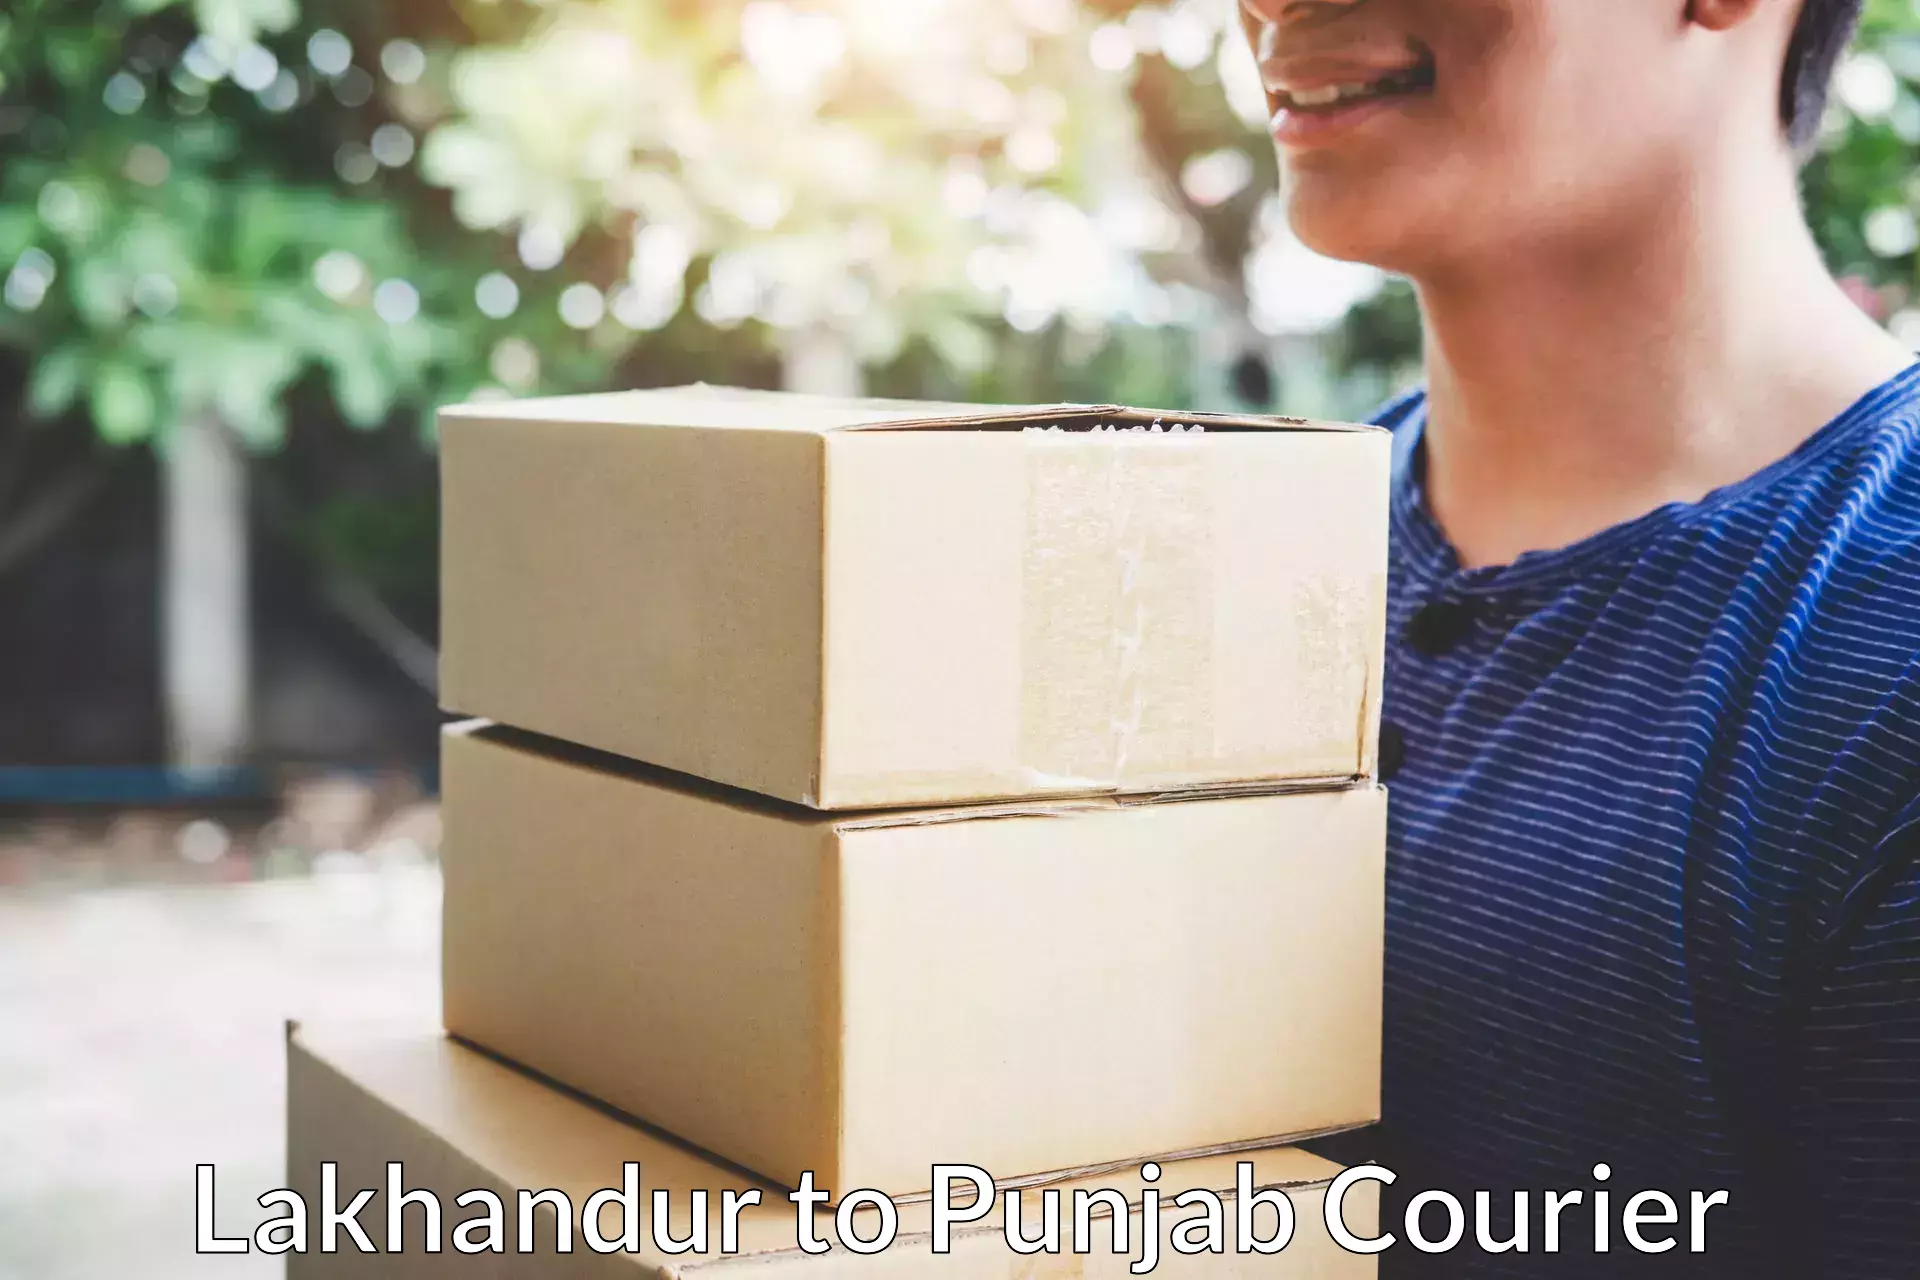 Quality relocation assistance Lakhandur to Amritsar